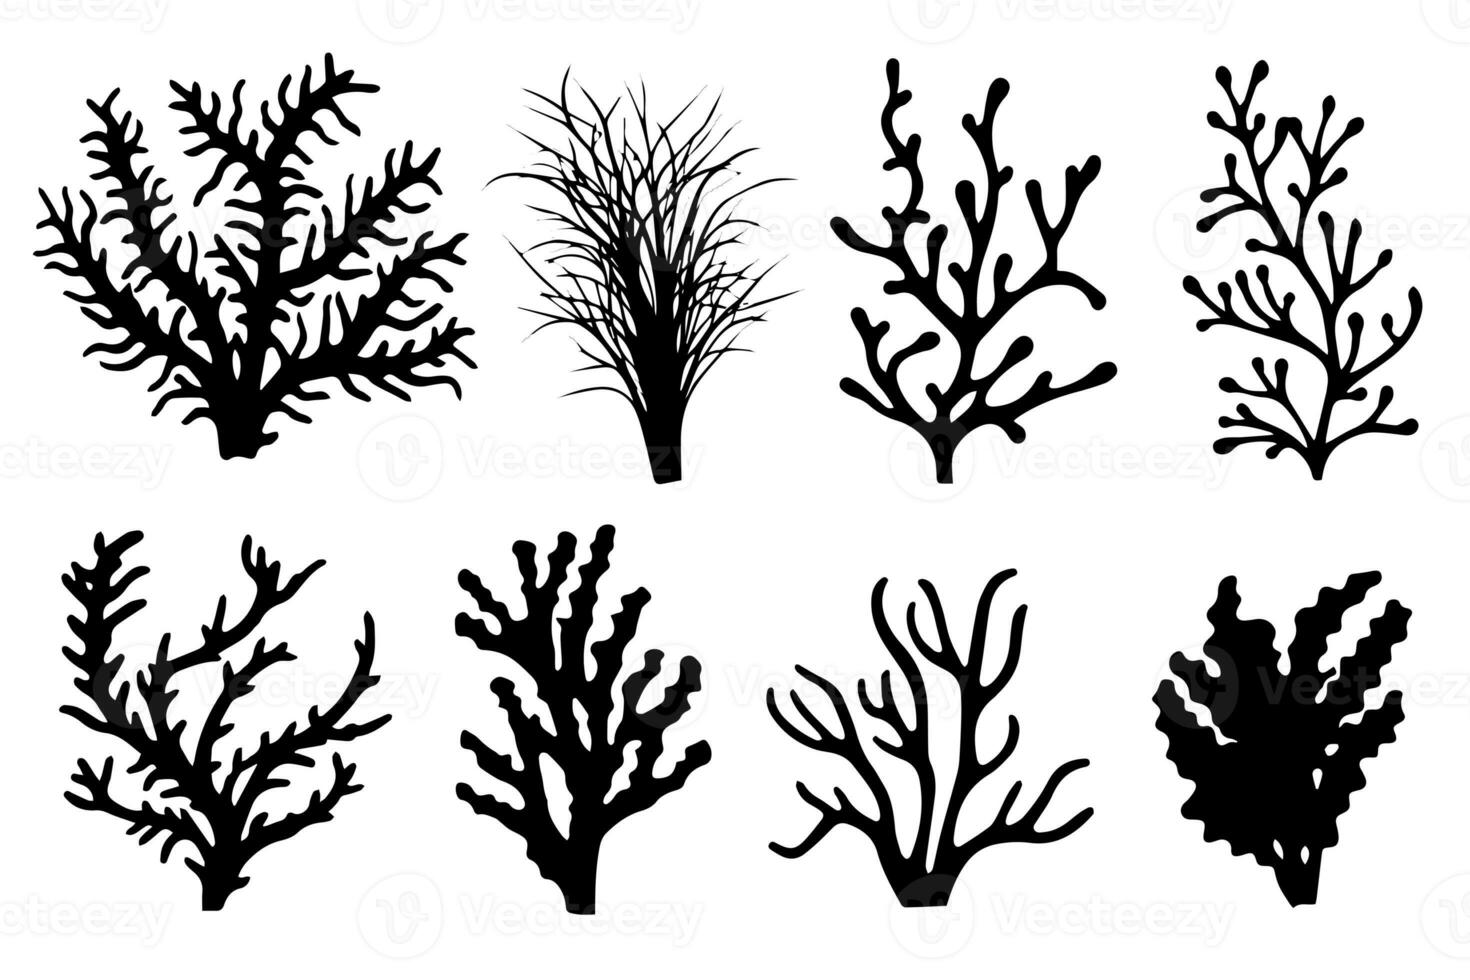 Hand drawn set of corals and seaweed silhouette isolated on white background. Vector icons and stamp illustration. photo